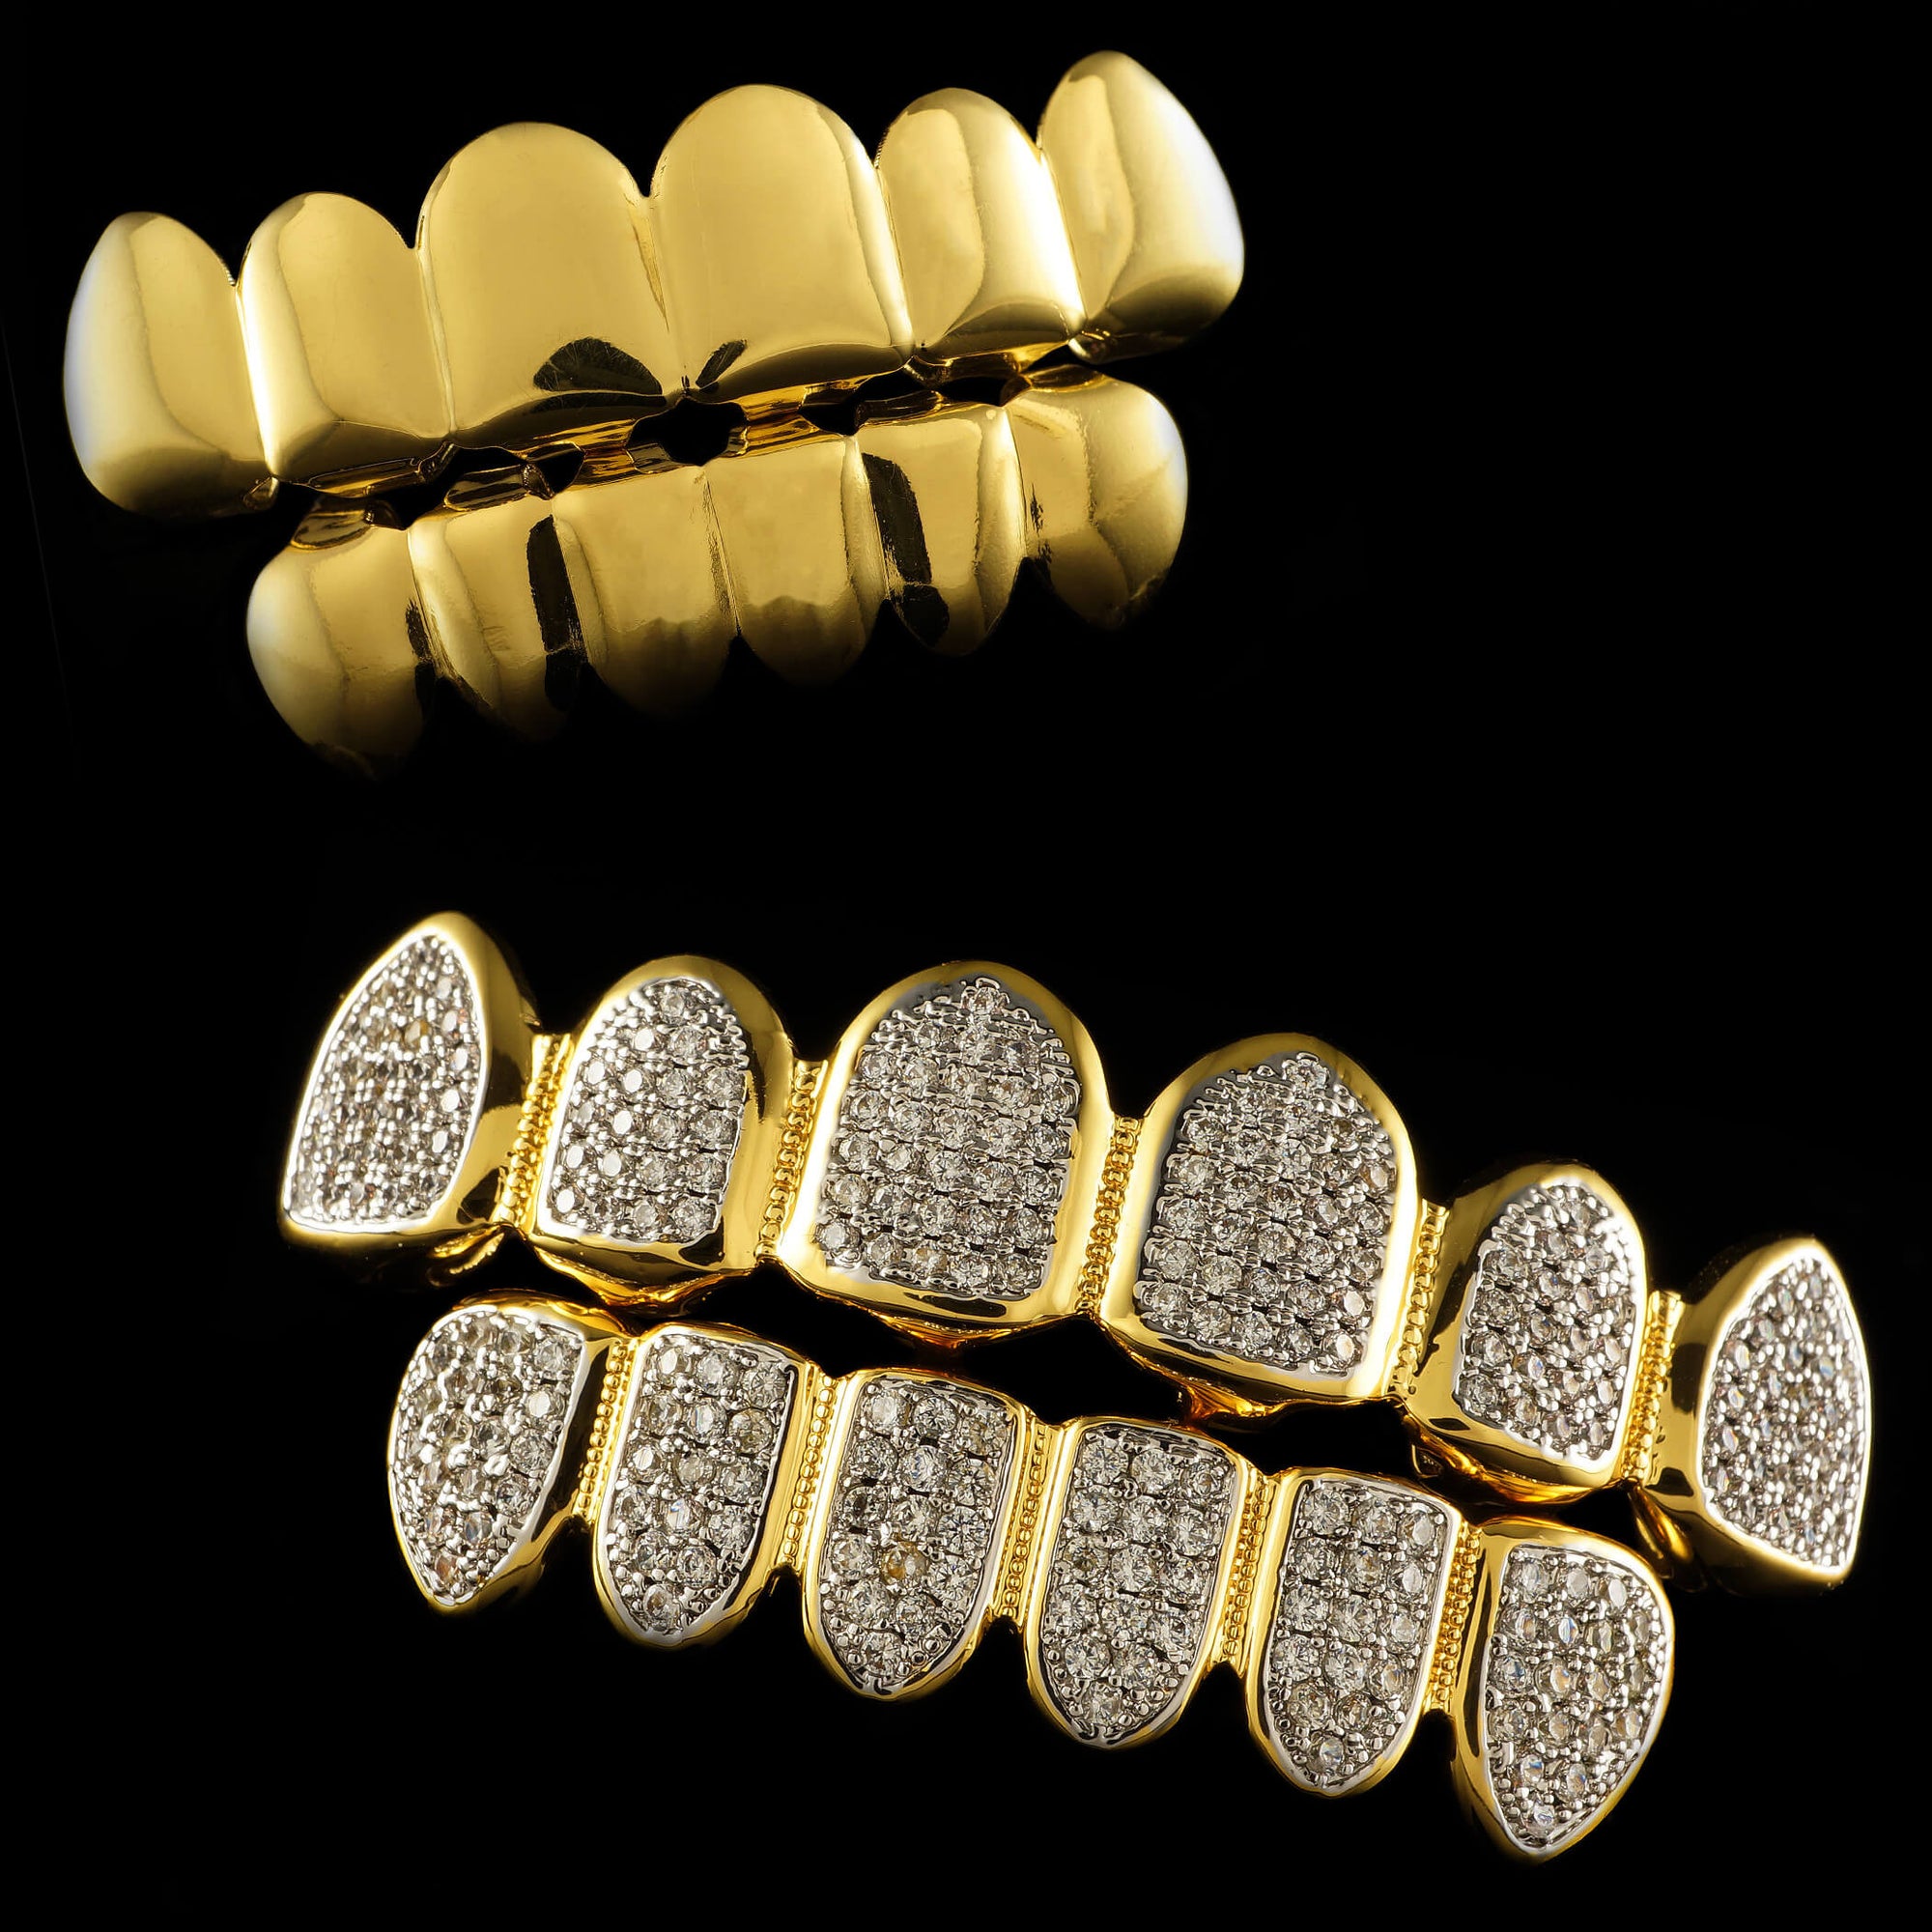 18k Stainless Steel Grillz vs 14k Gold Plated Grillz